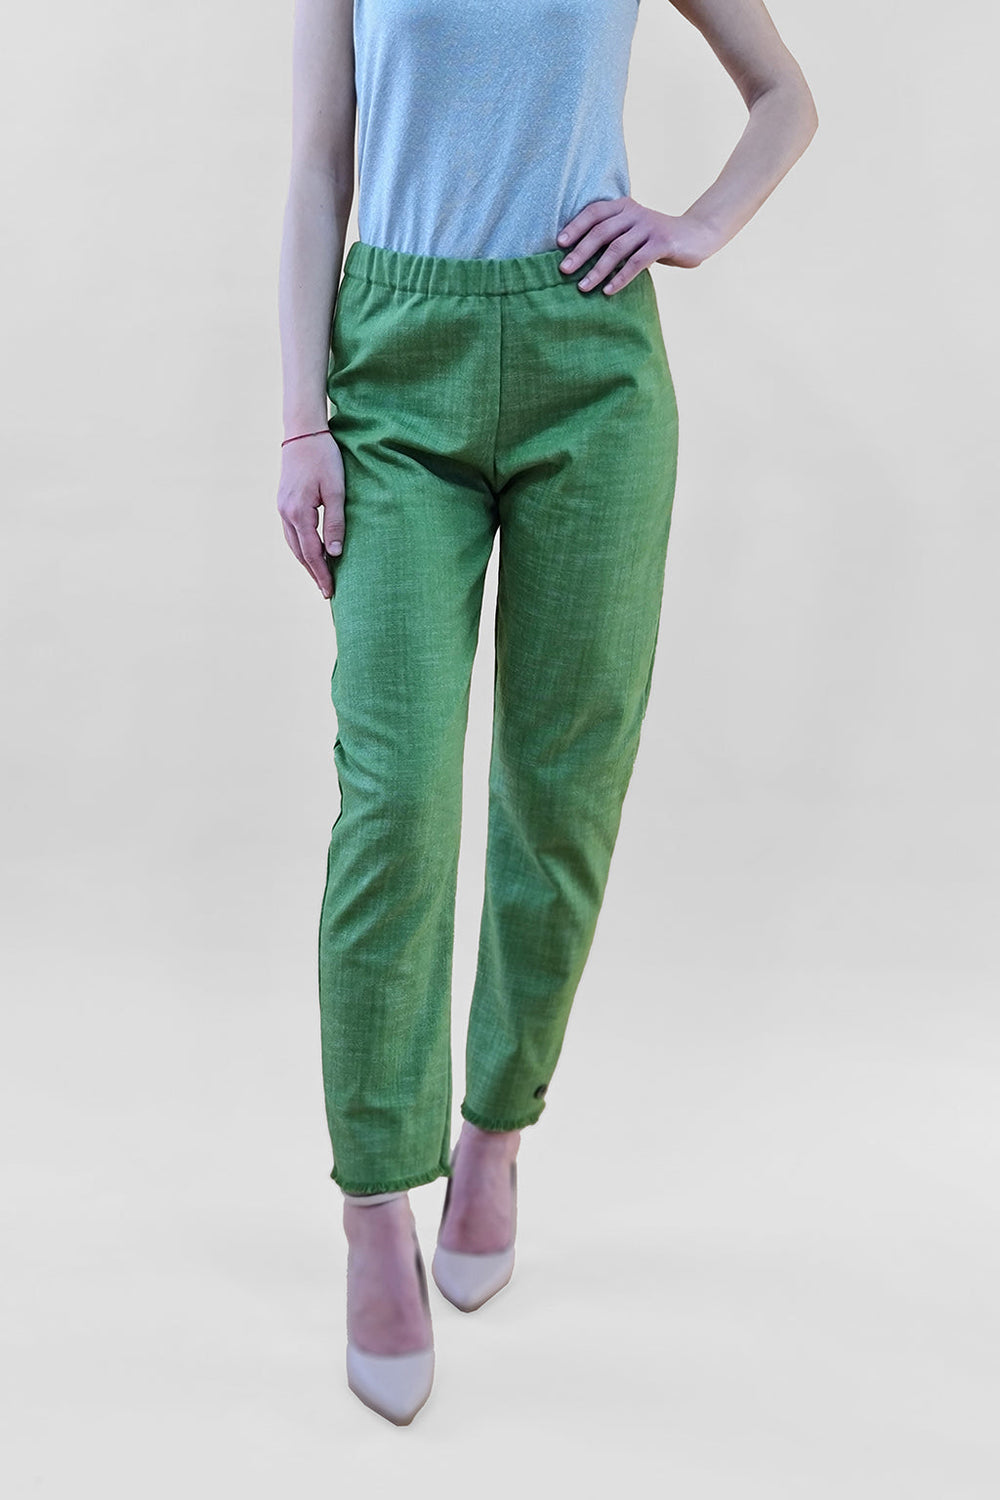 Woman wearing green pants and a grey top with white high heels